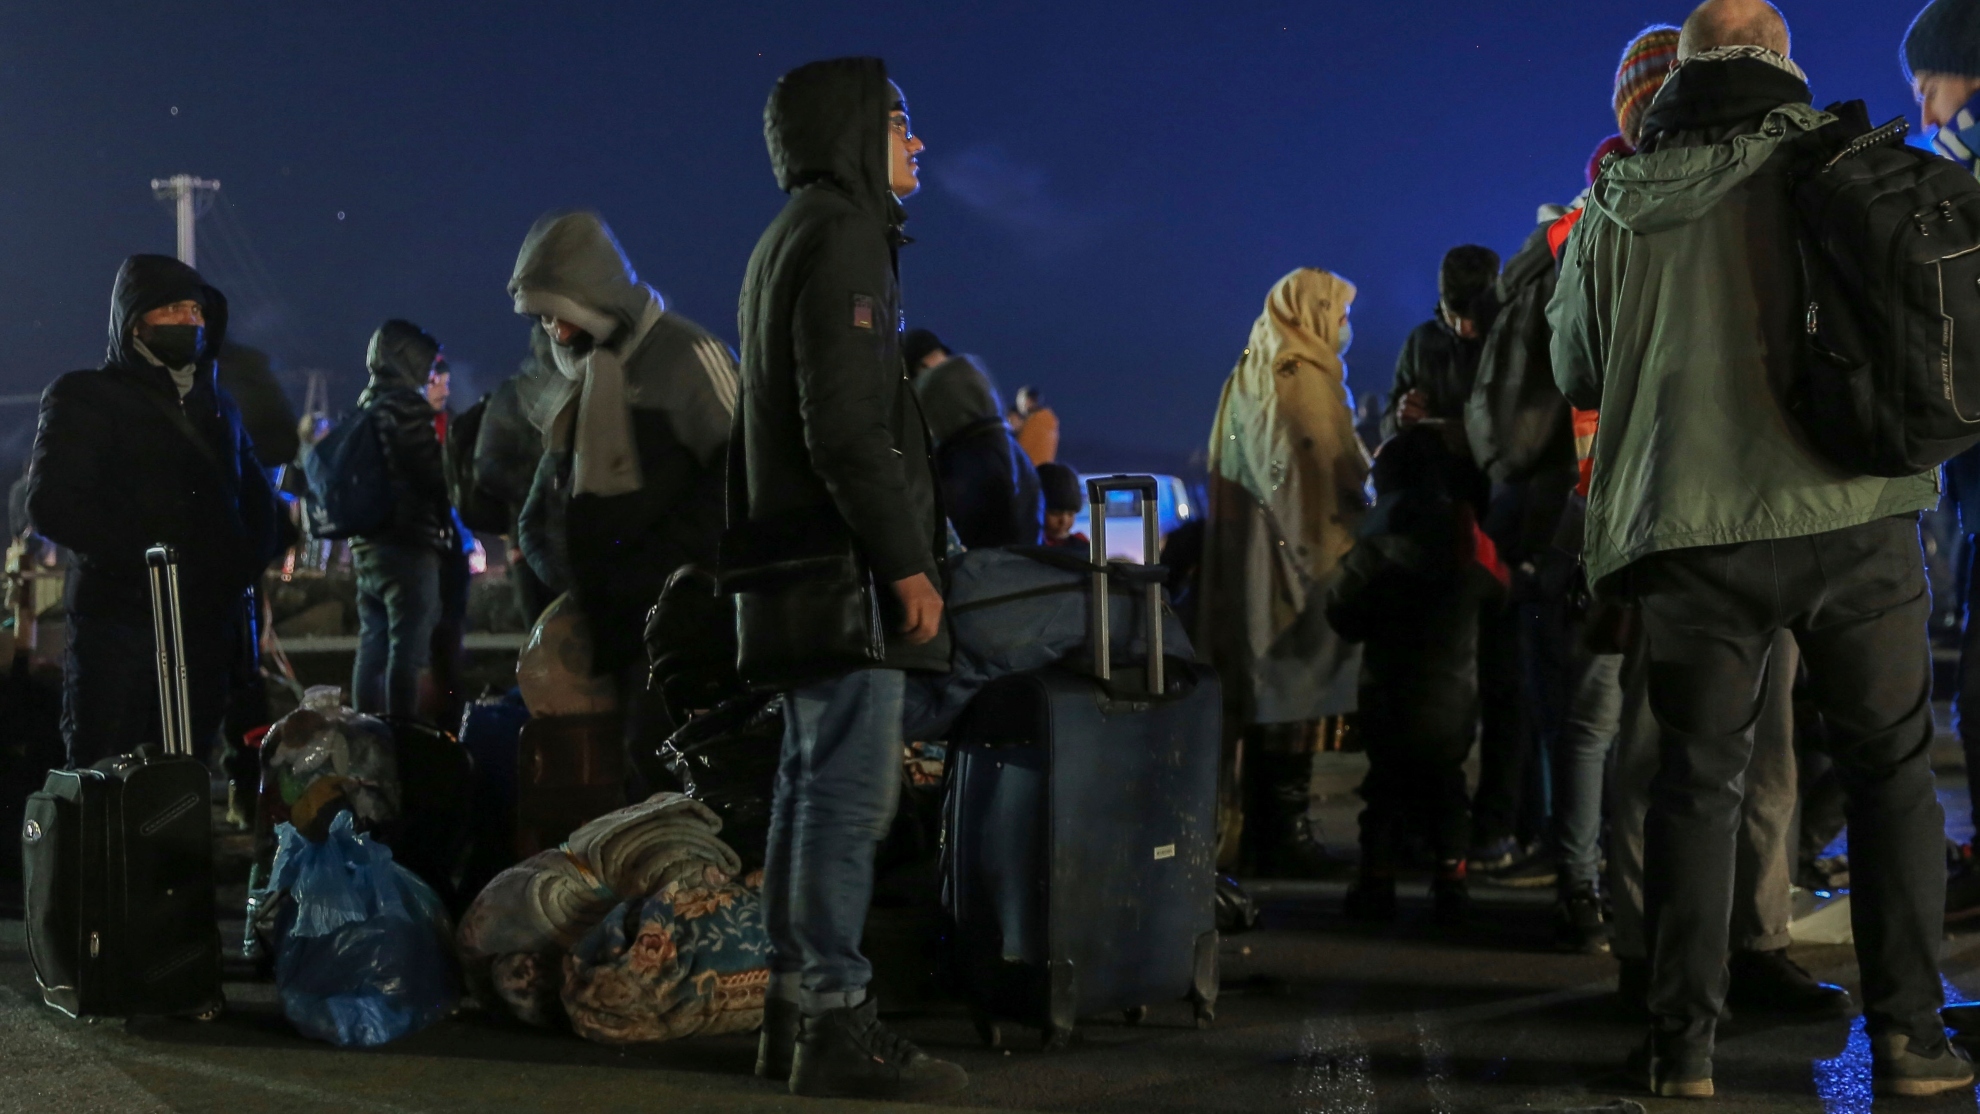 Refugees arrive at the Medyka border crossing after fleeing from the Ukraine, in Poland, Monday, Feb. 28, 2022.